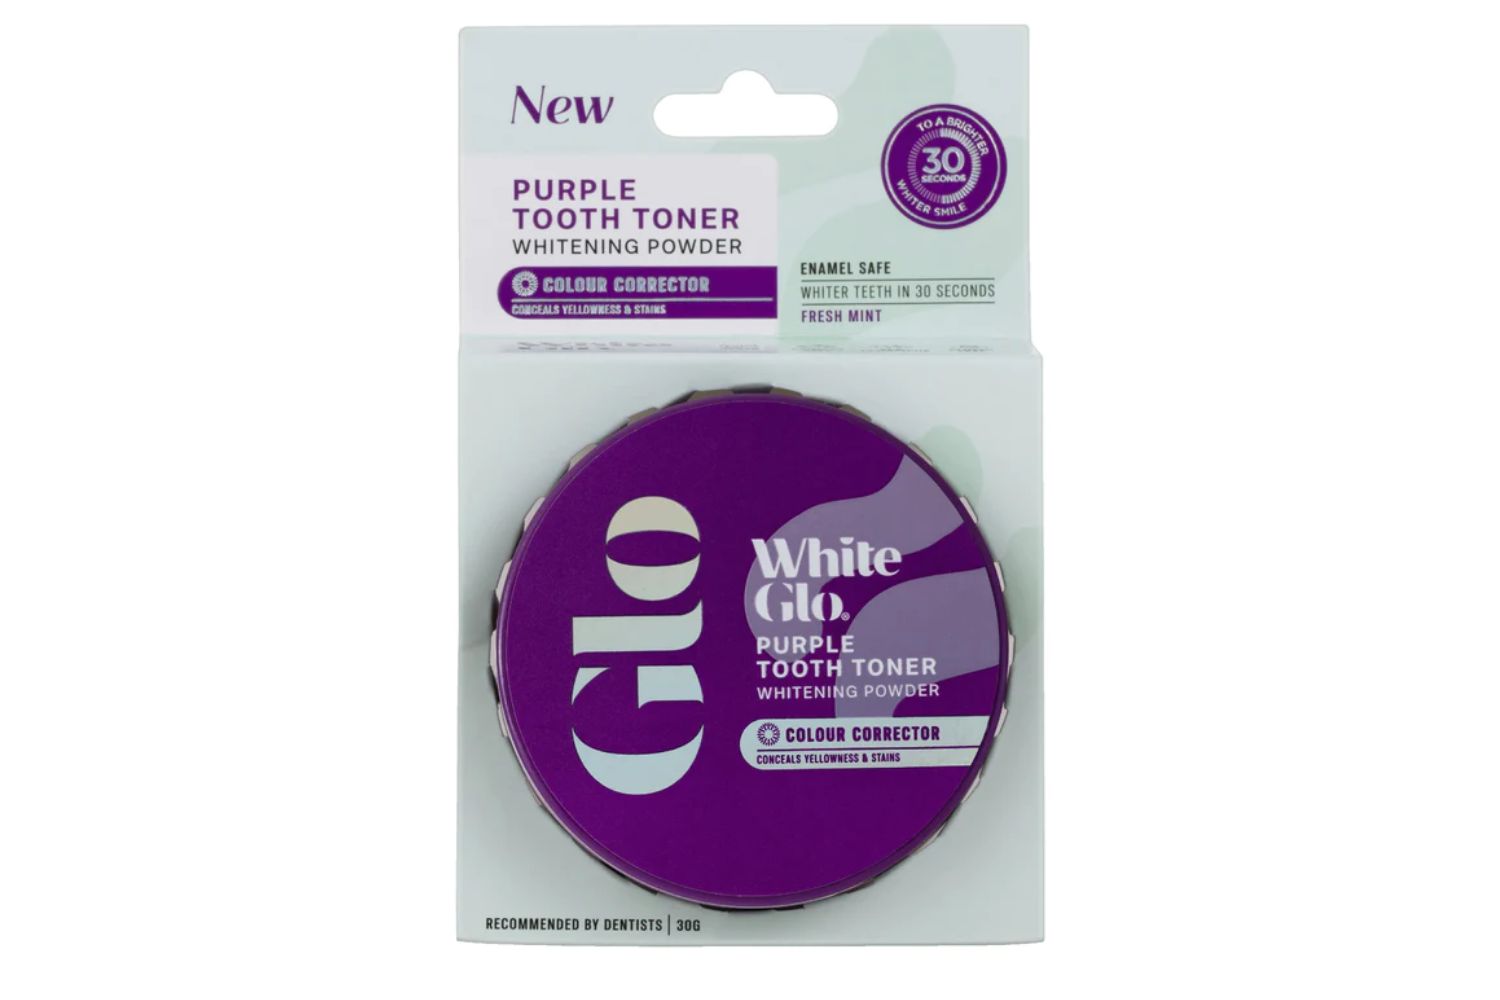 https://whiteglo.com/products/purple-tooth-toner-powder